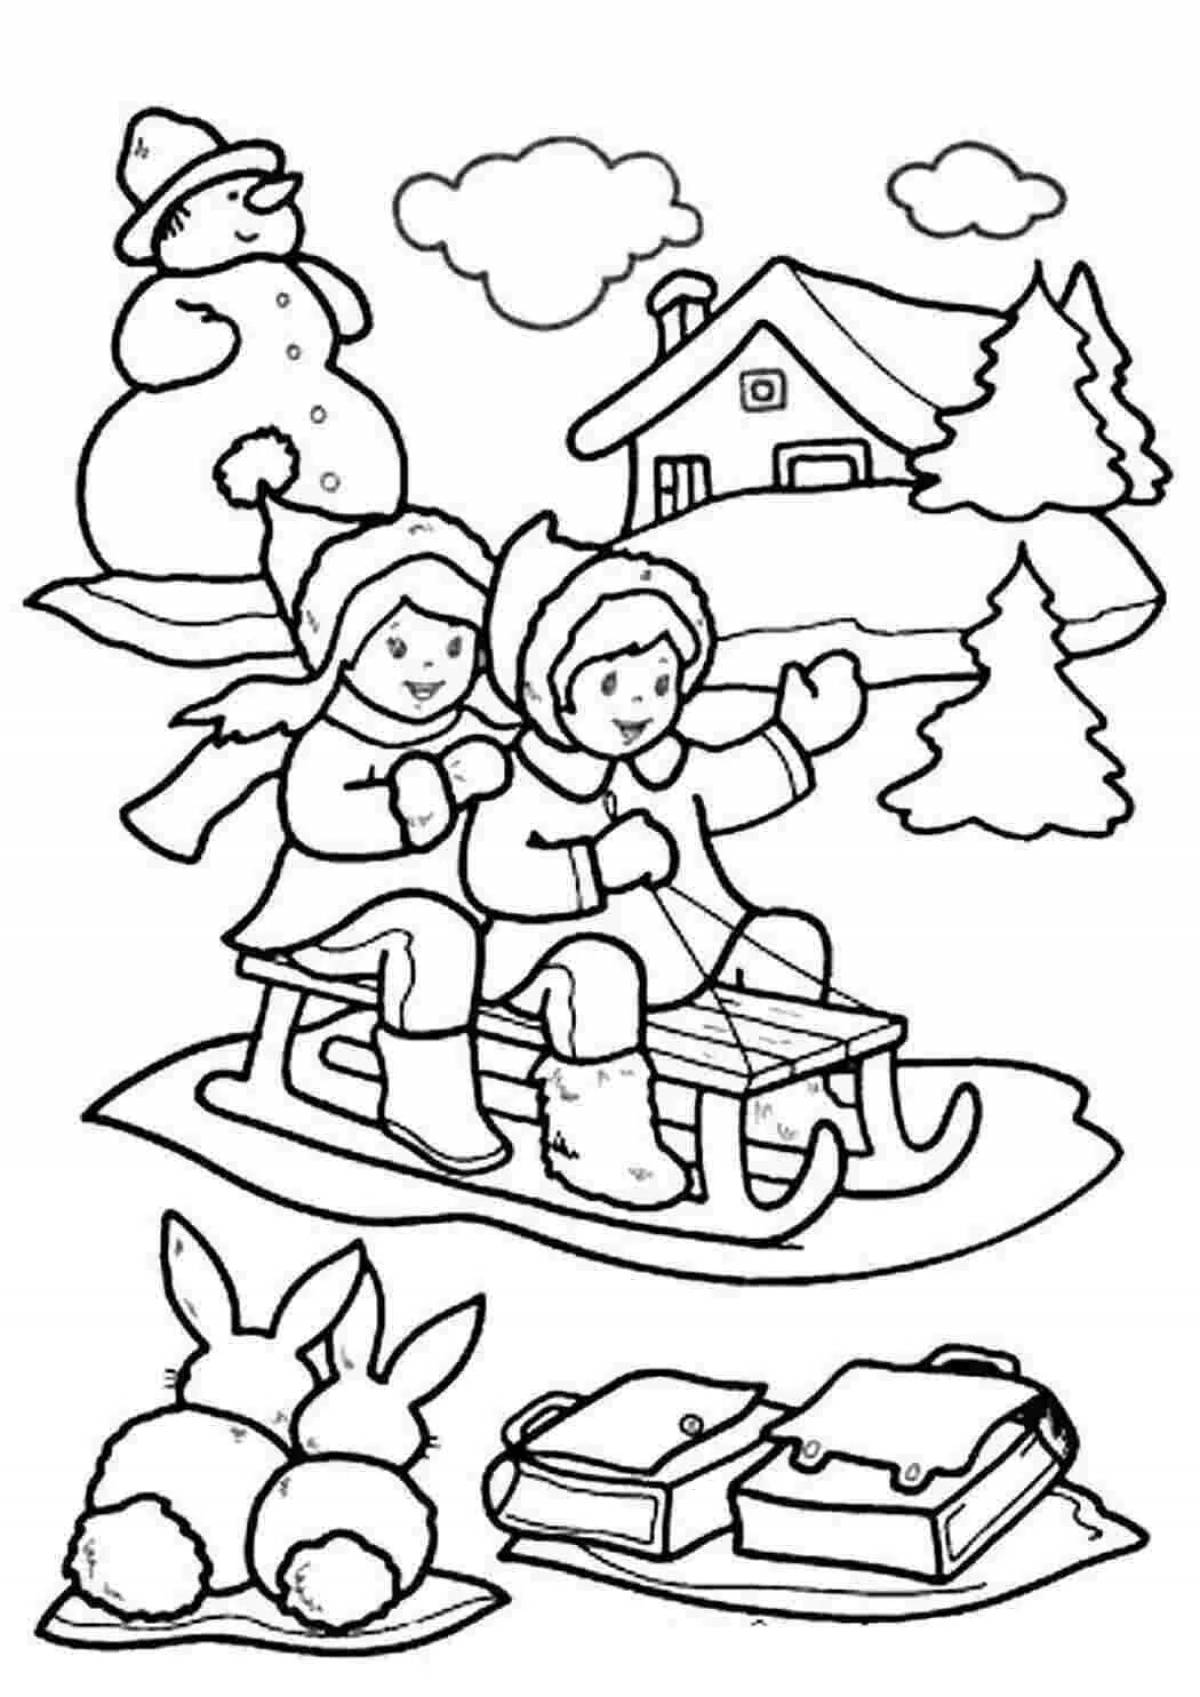 Christmas explosive coloring book